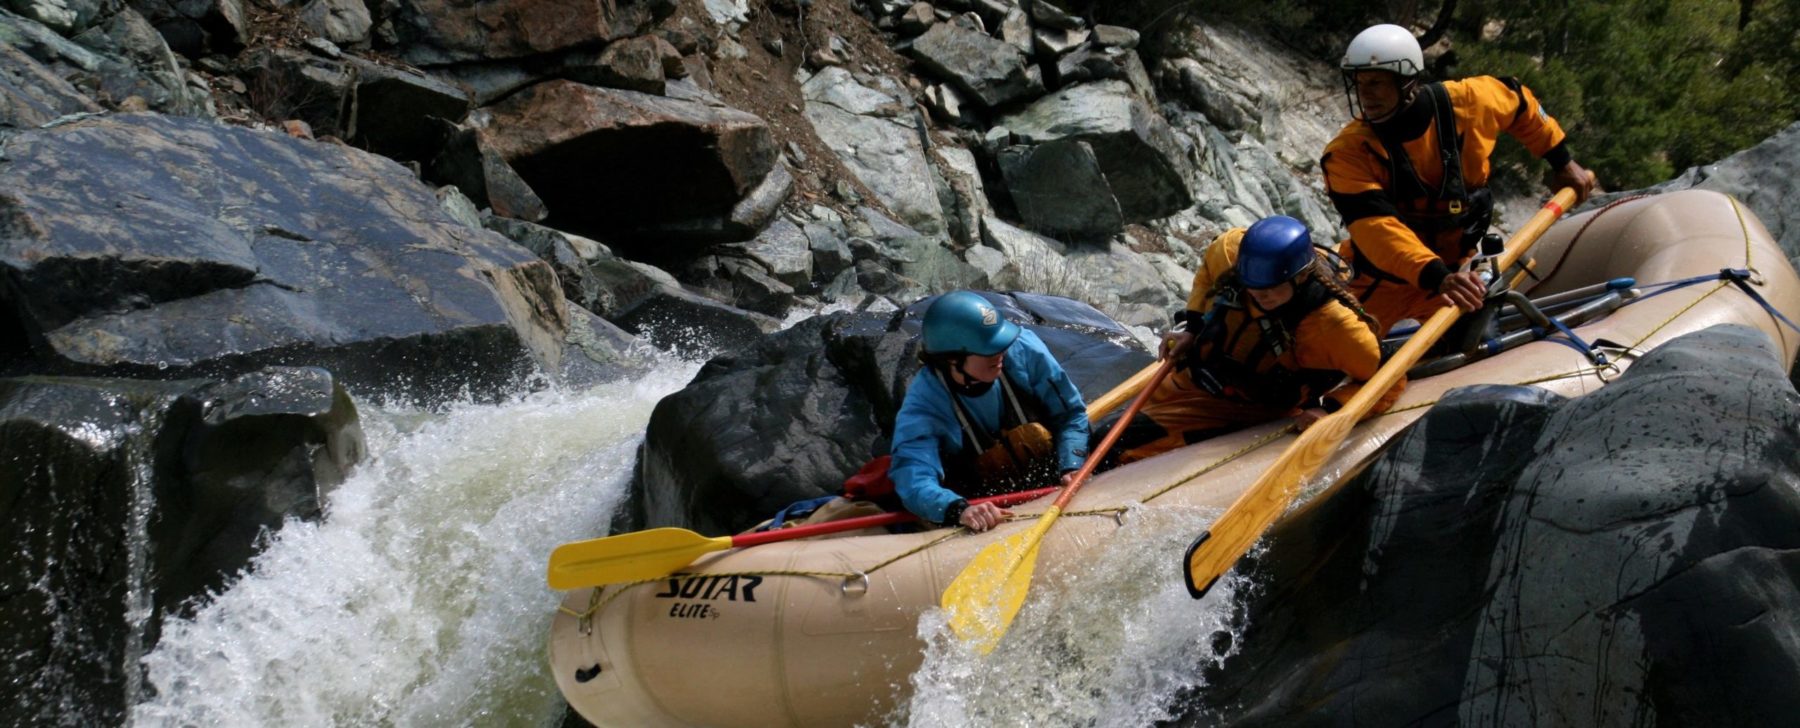 Types of Whitewater Rafts (& Crafts) - Best Rafting and Kayaking ...